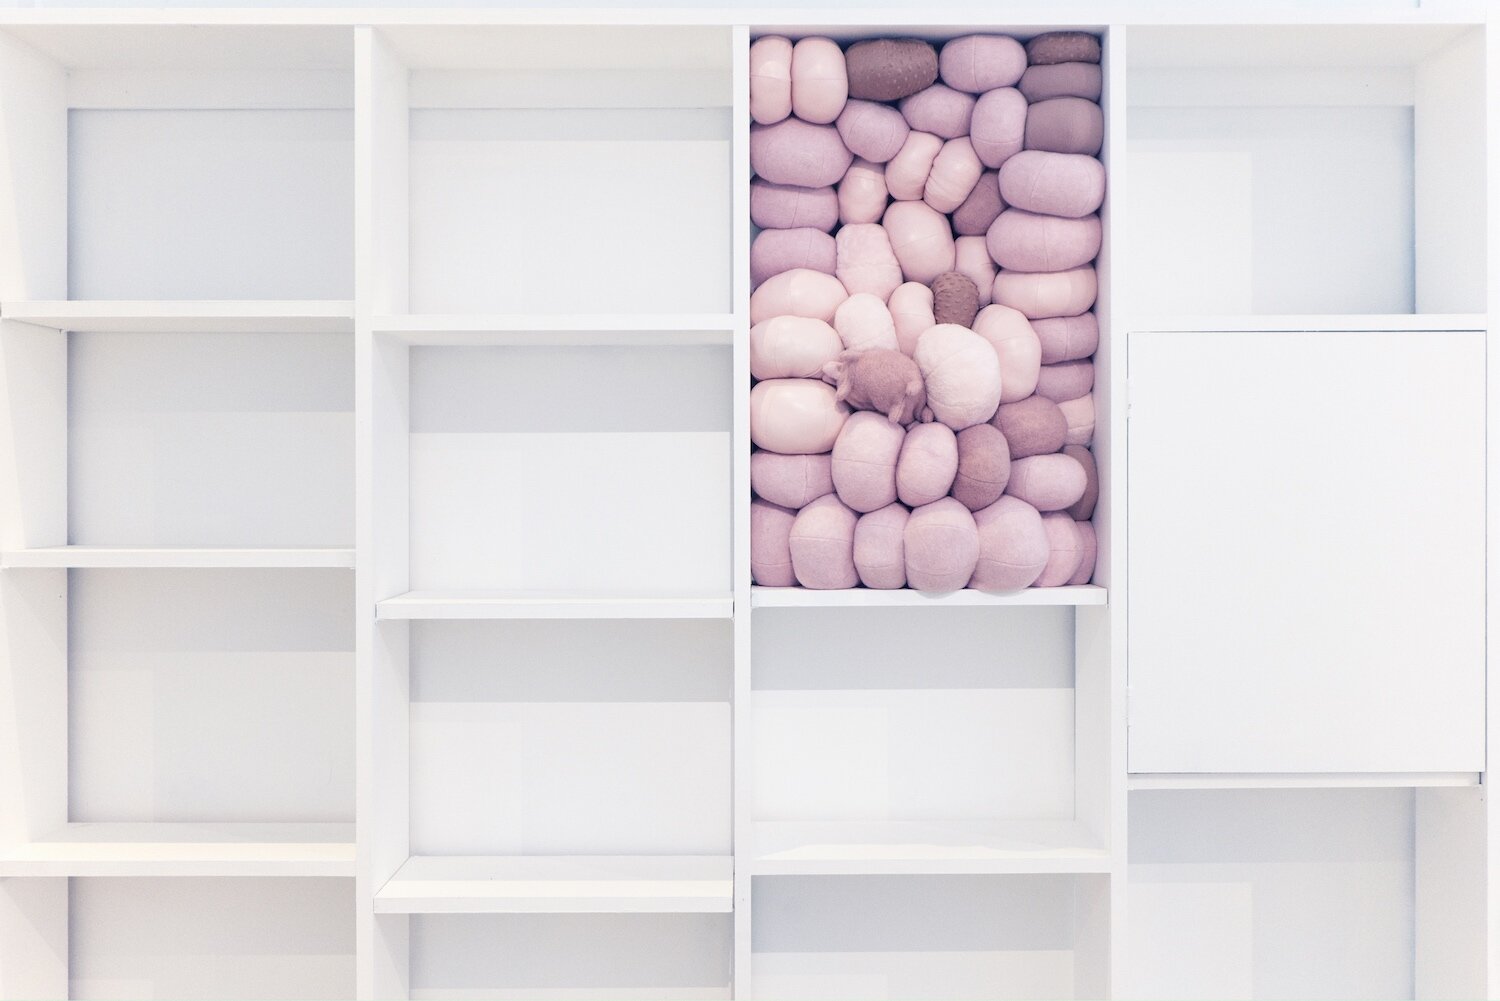   Pushback,  2019  Installation of 45 soft sculptures in fixed shelving unit 